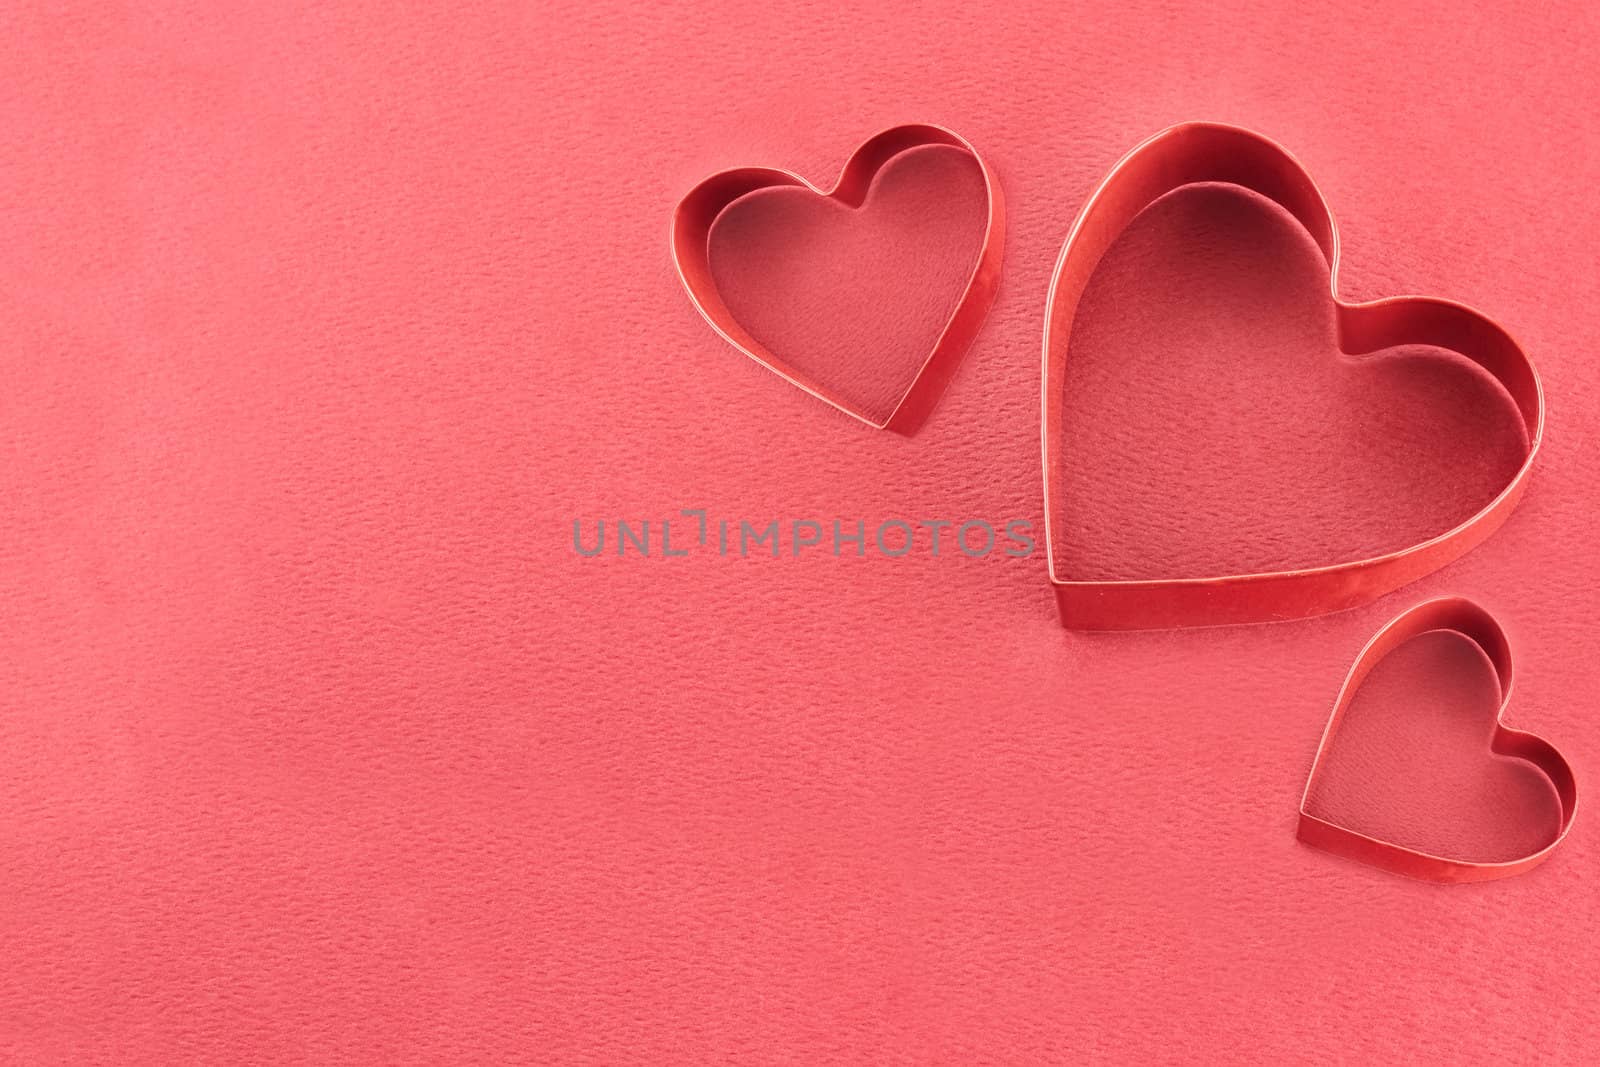 Three heart shaped cookie cutters over a red background.